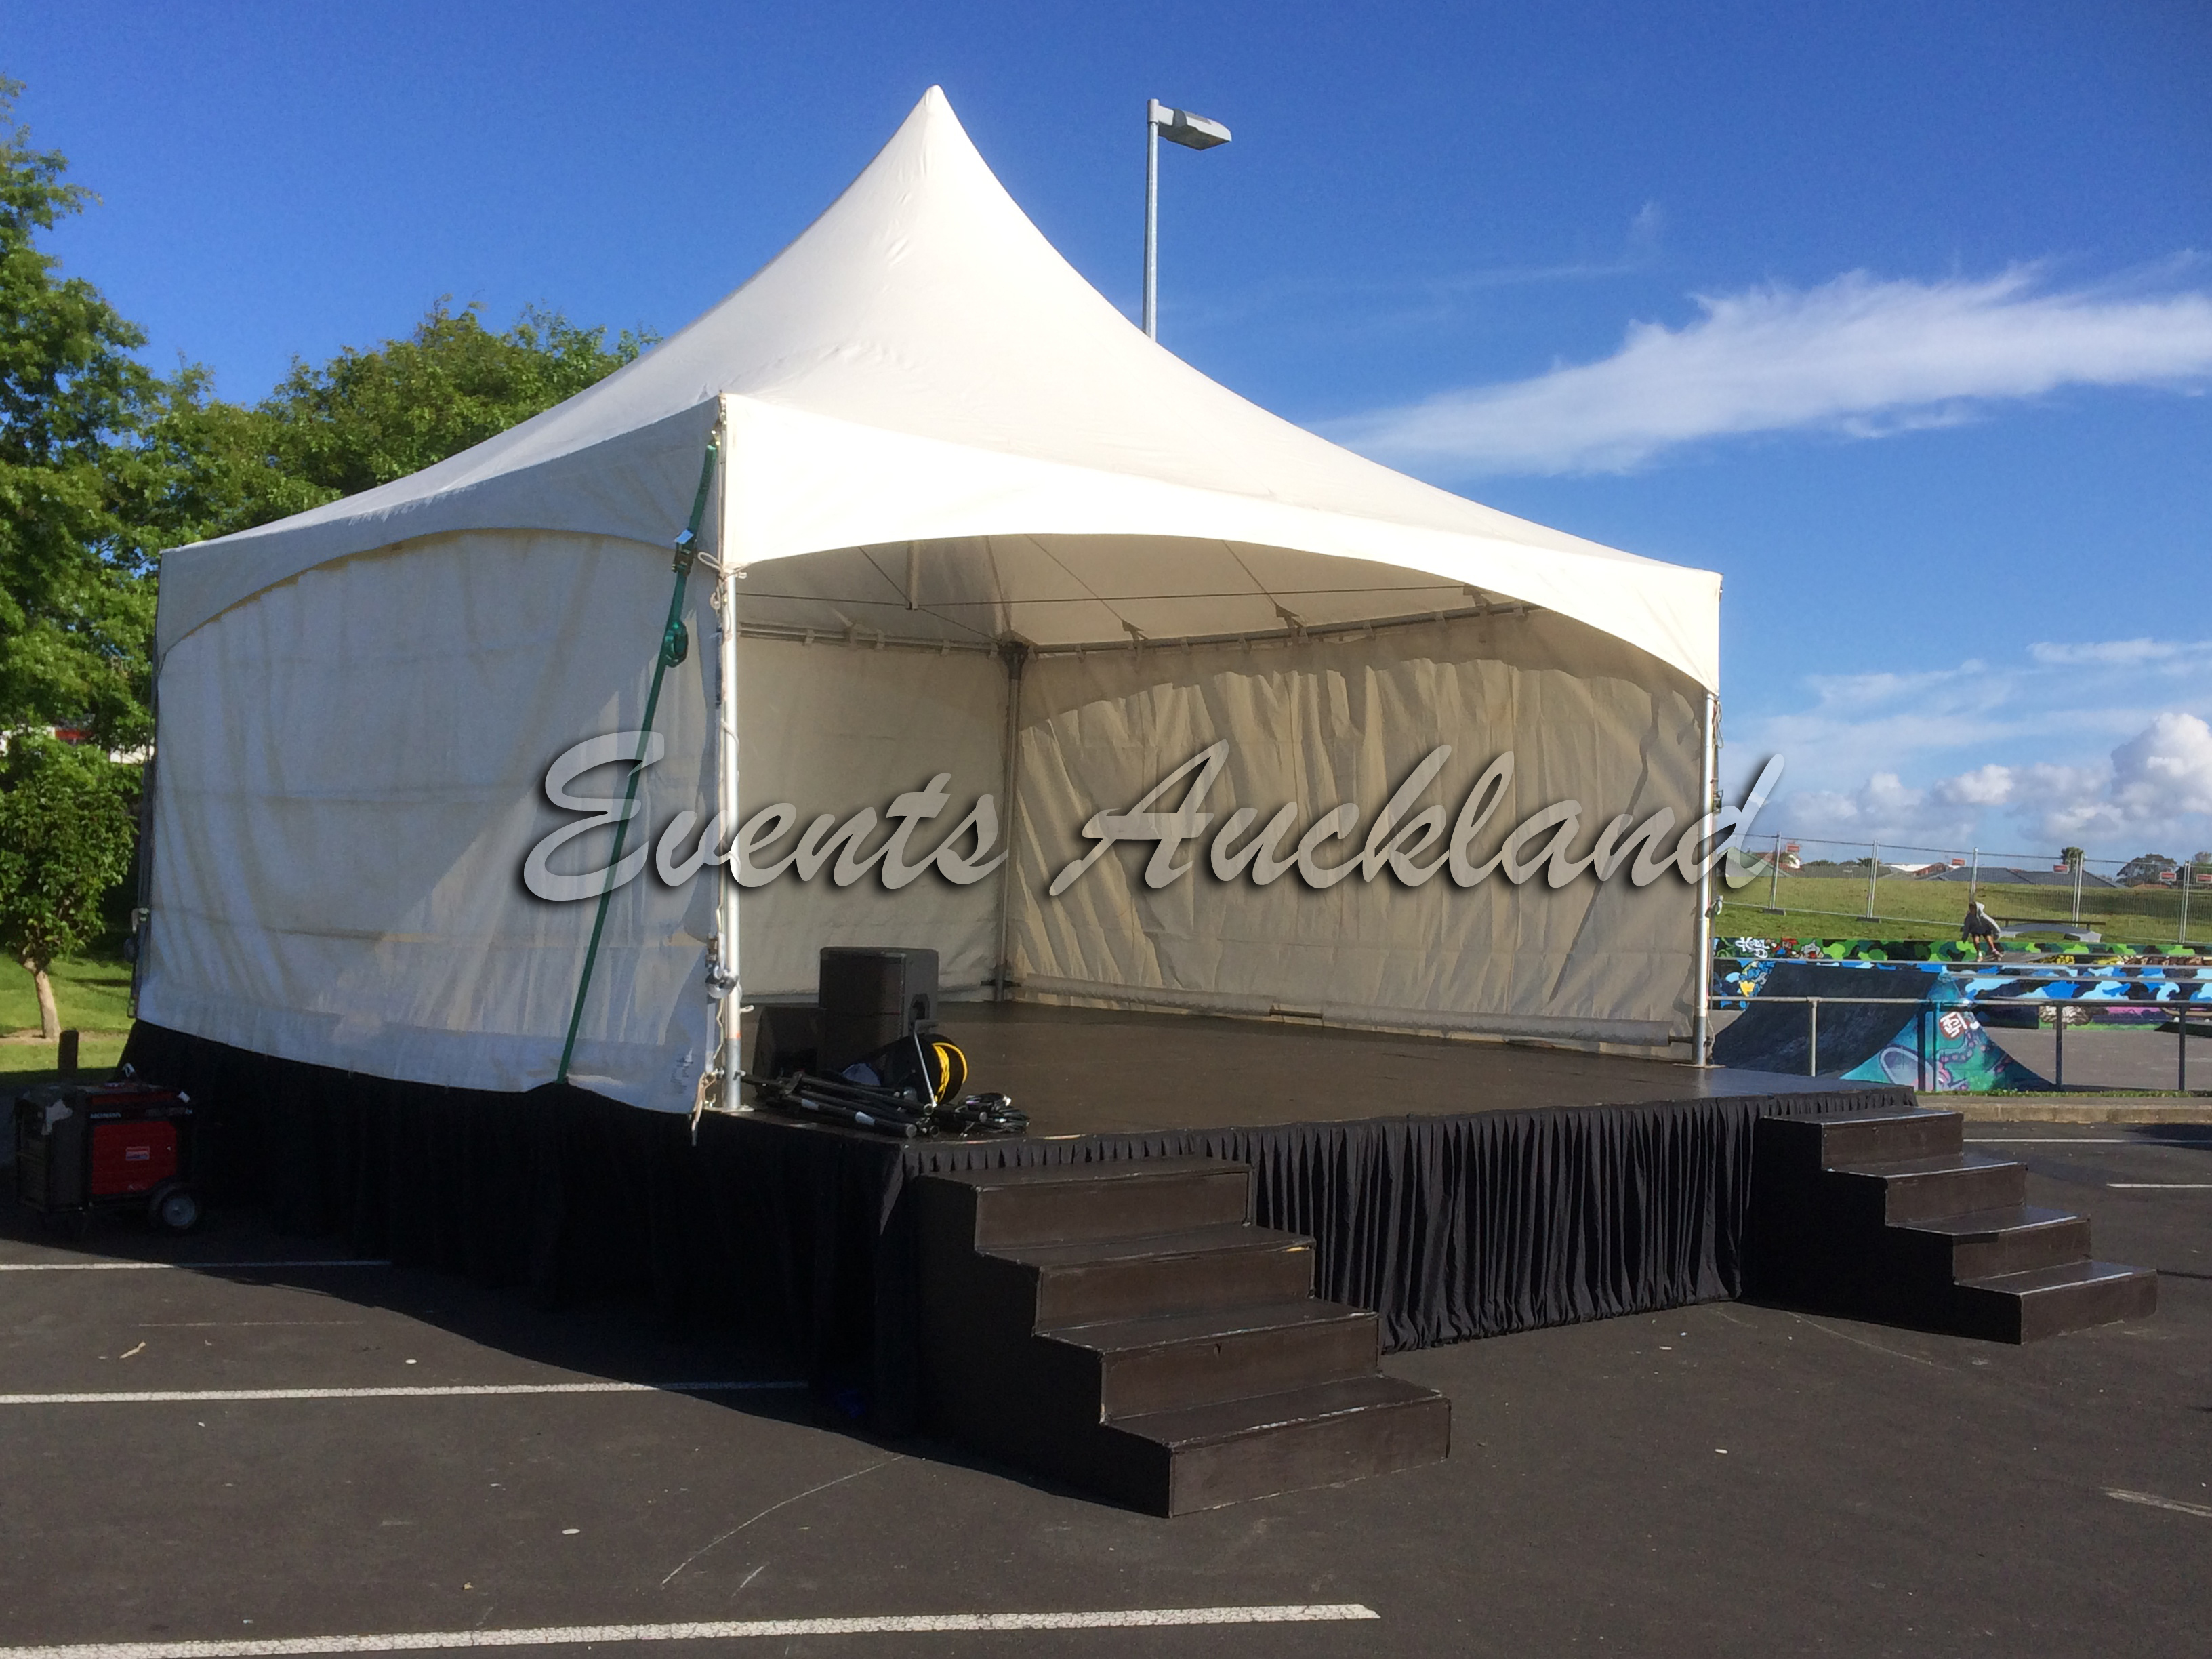 Events Auckland